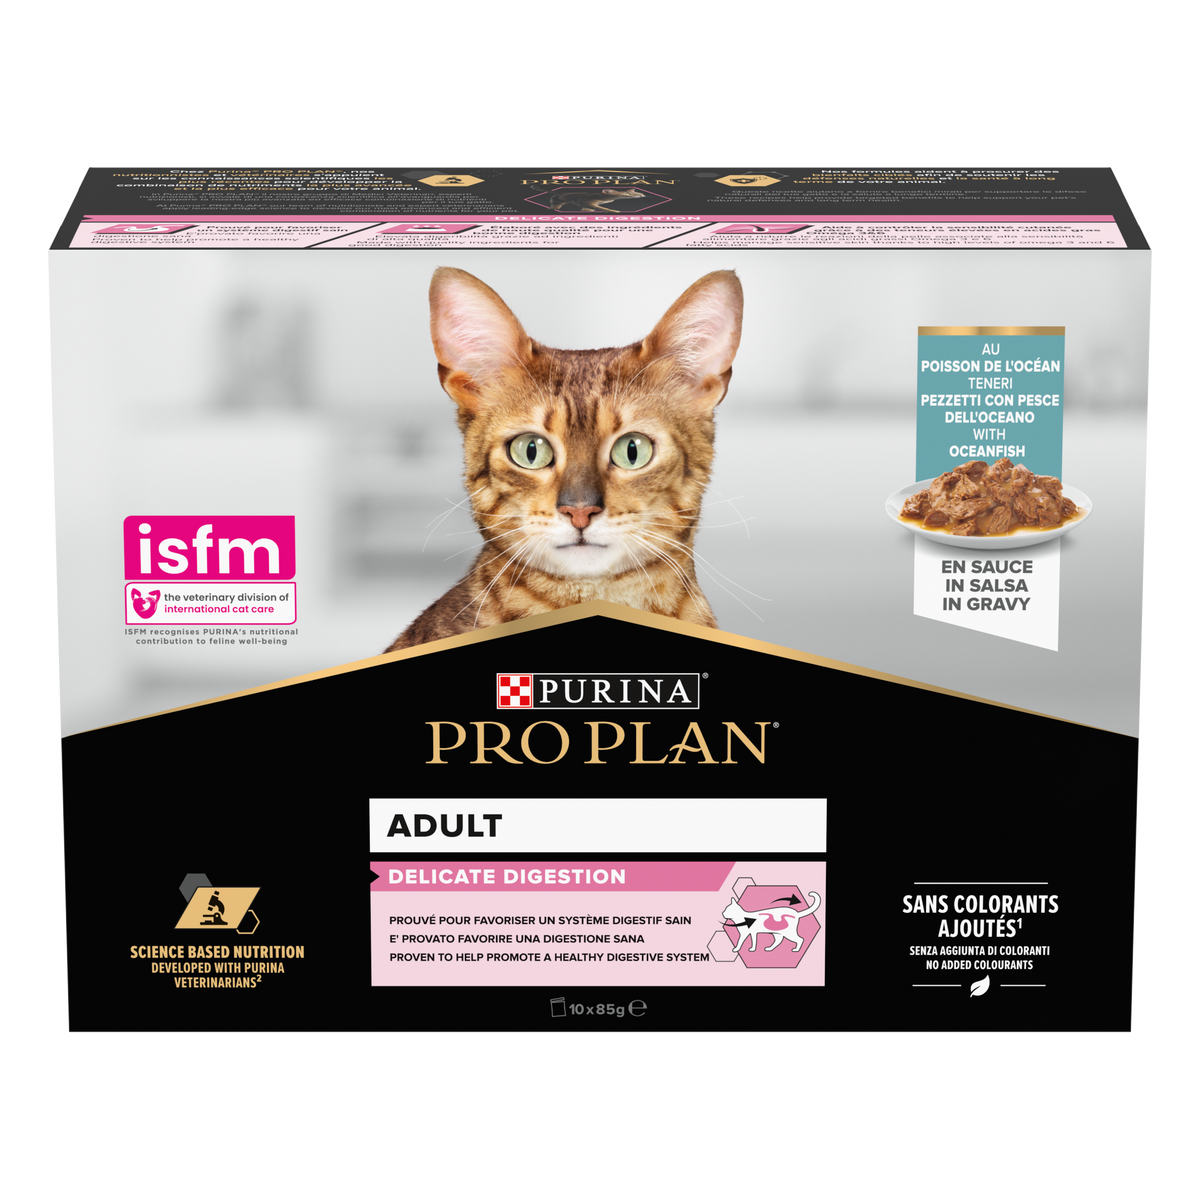 PURINA® PRO PLAN Adult Delicate Digestion Ocean Fish